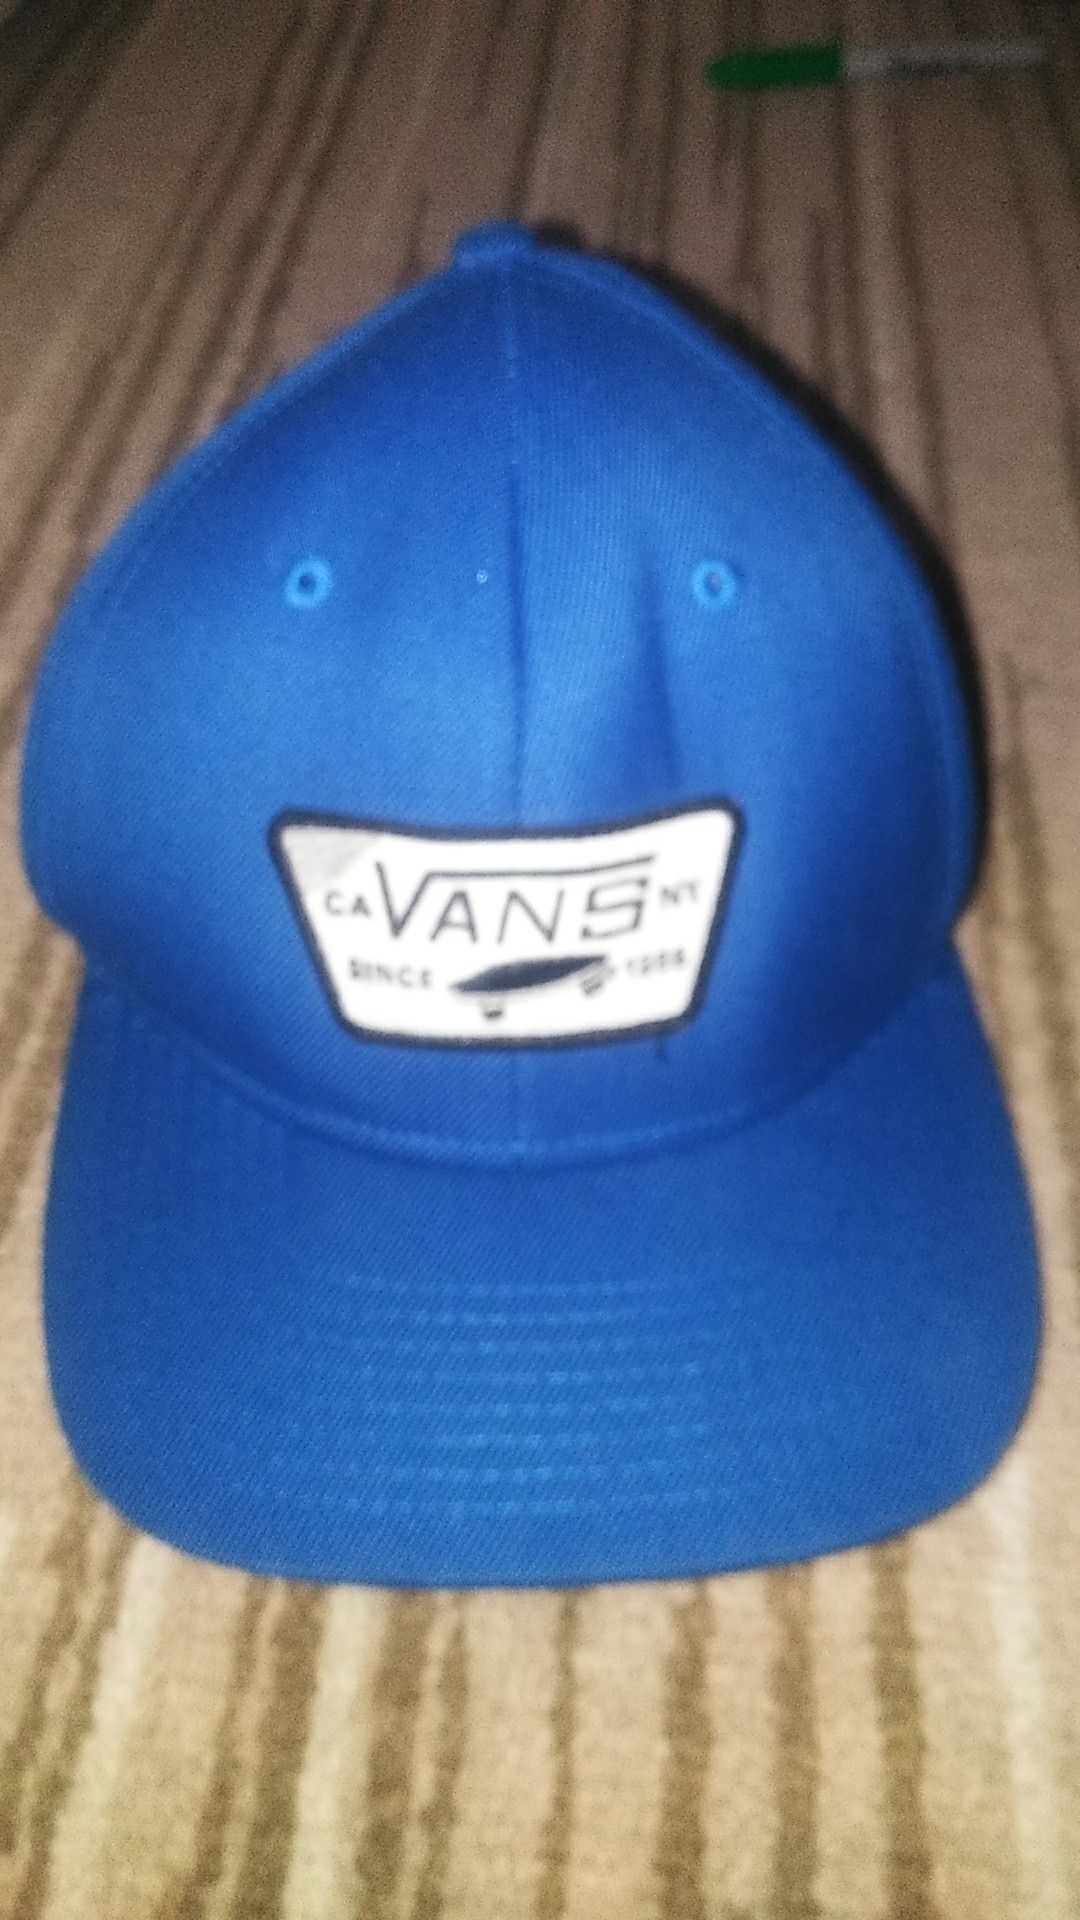 Vans of the wall hat